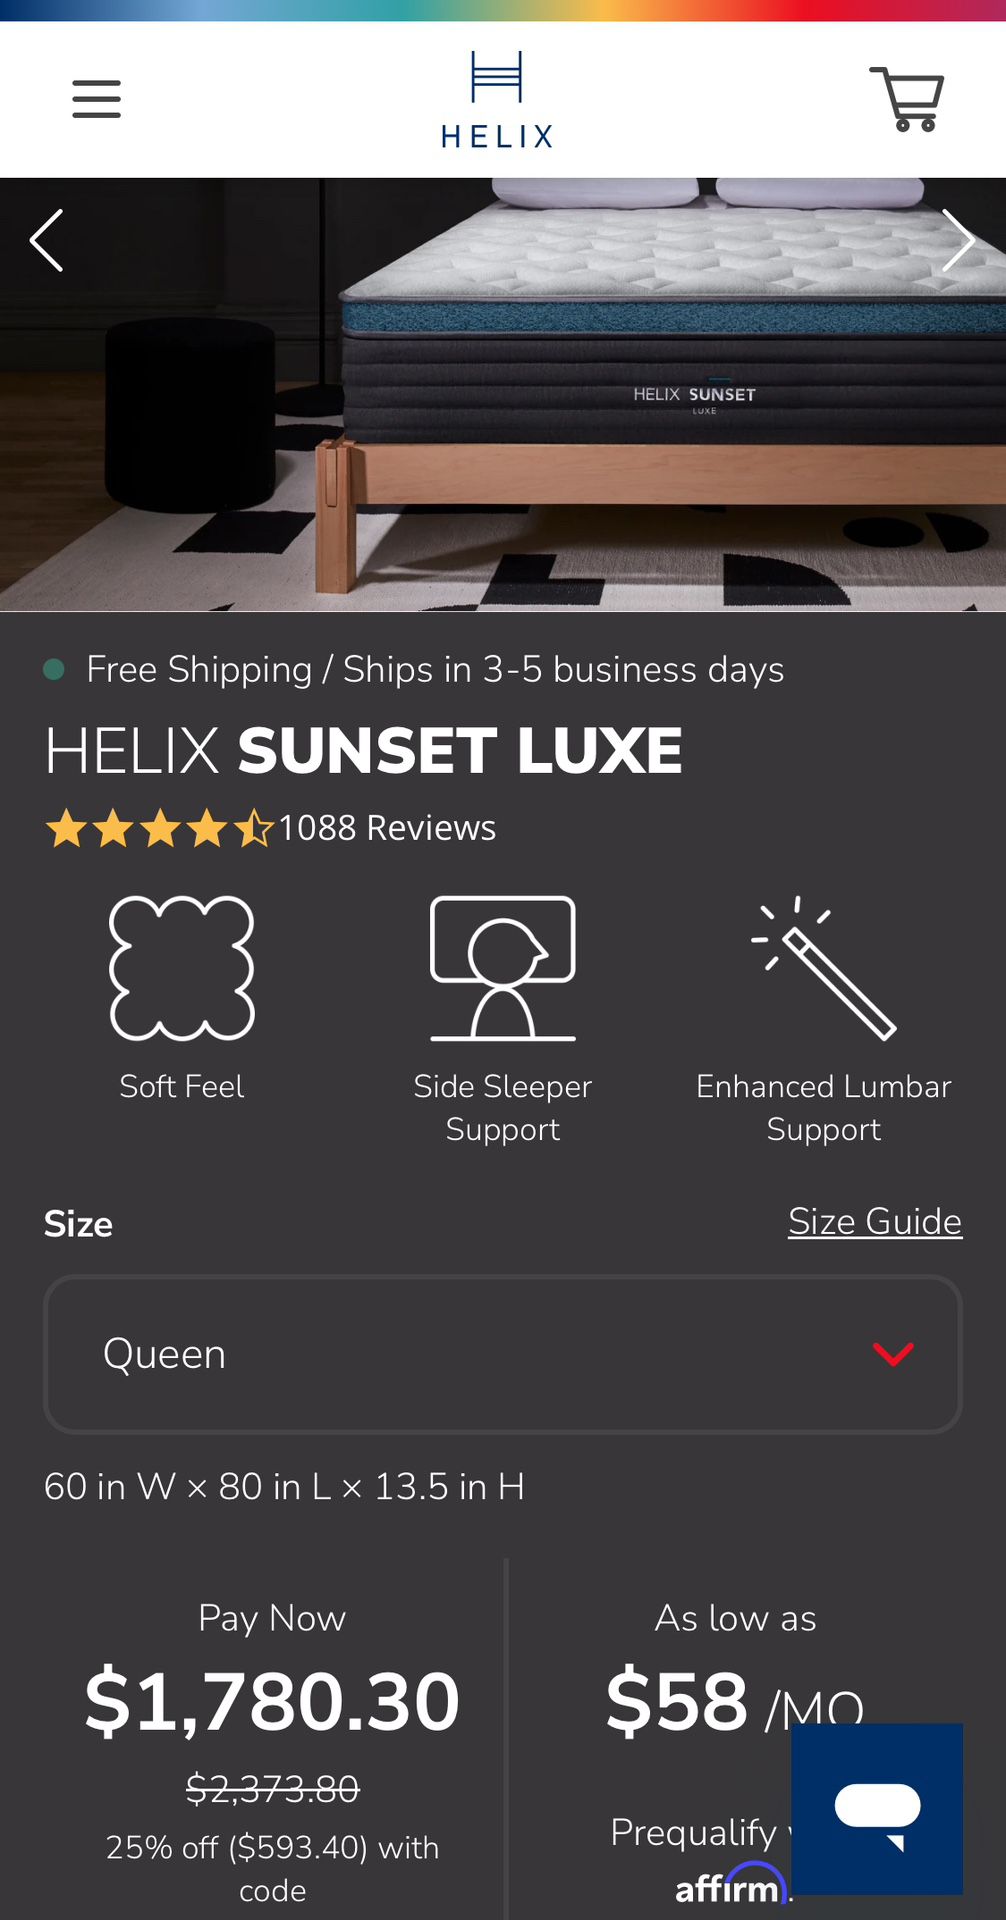 Helix Sunset luxe queen mattress, moving out and need money need gone ASAP! Price negotiable